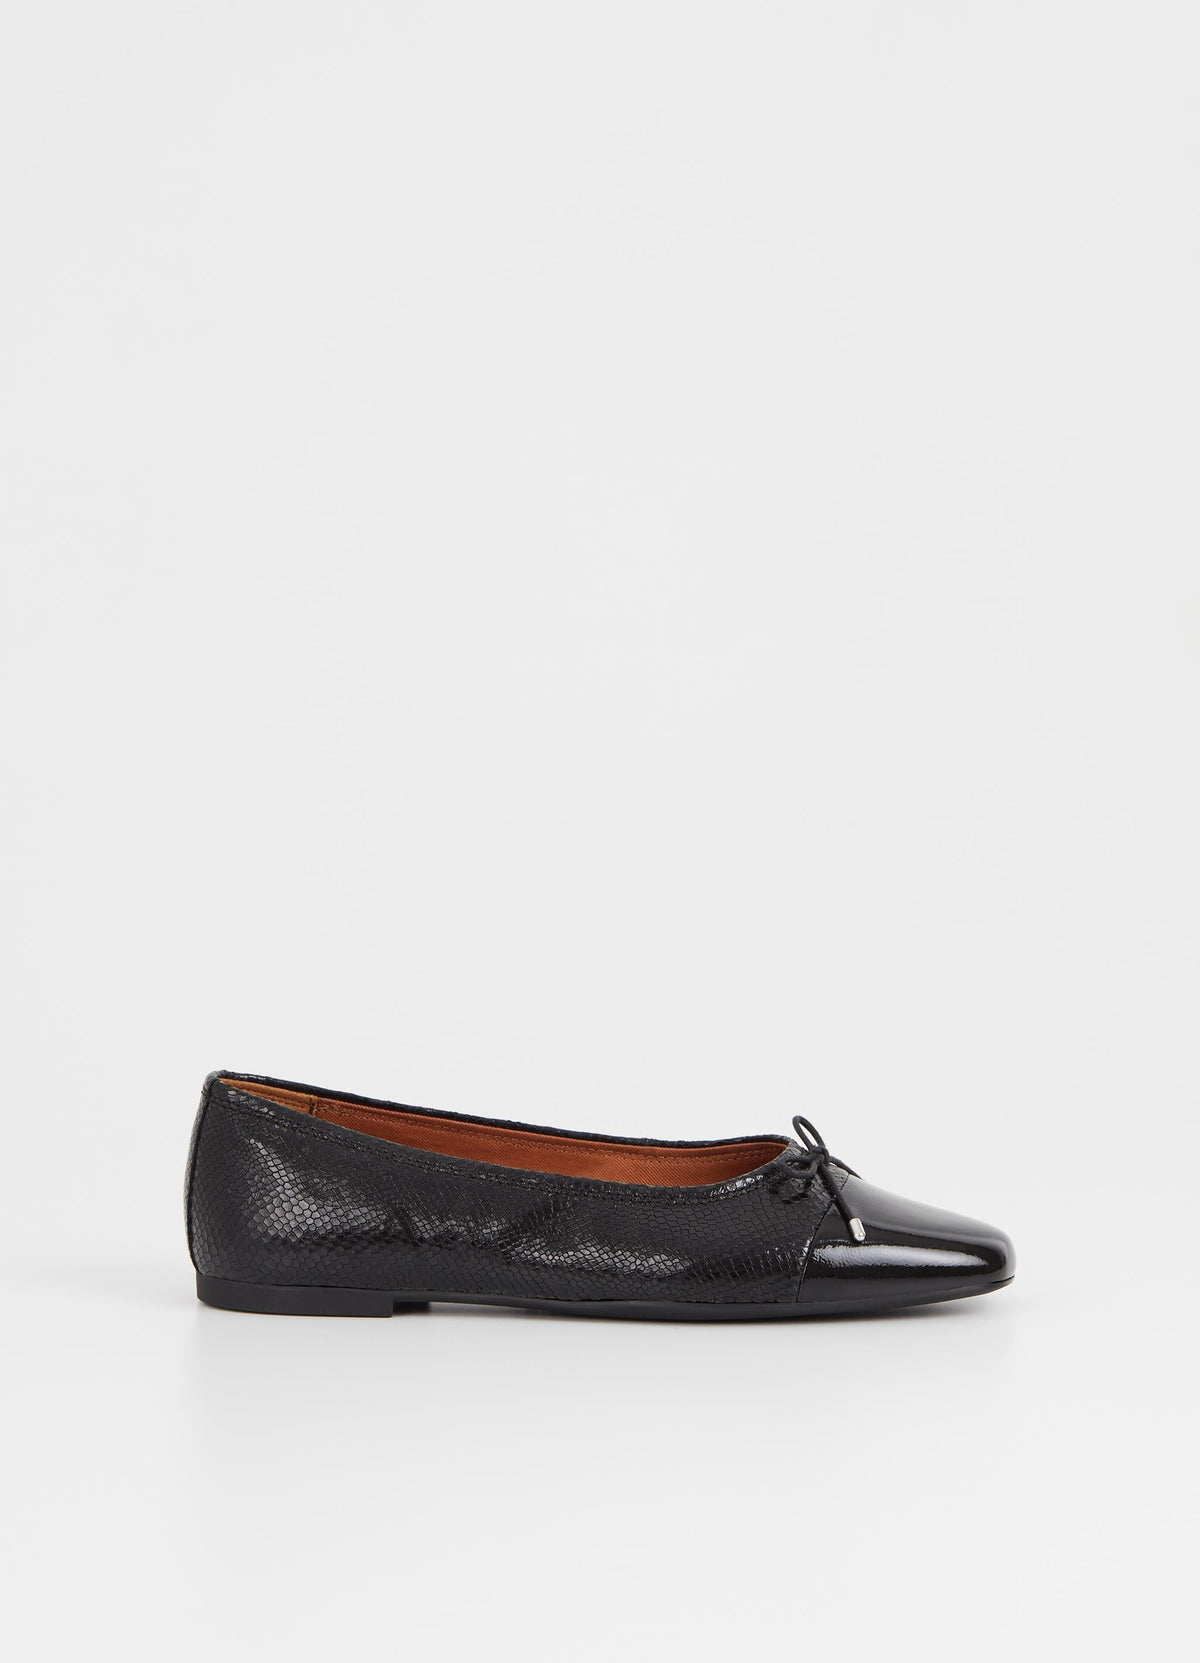 Black leather ballet pump with croc effect leather a patent toe and tie details with silver tips